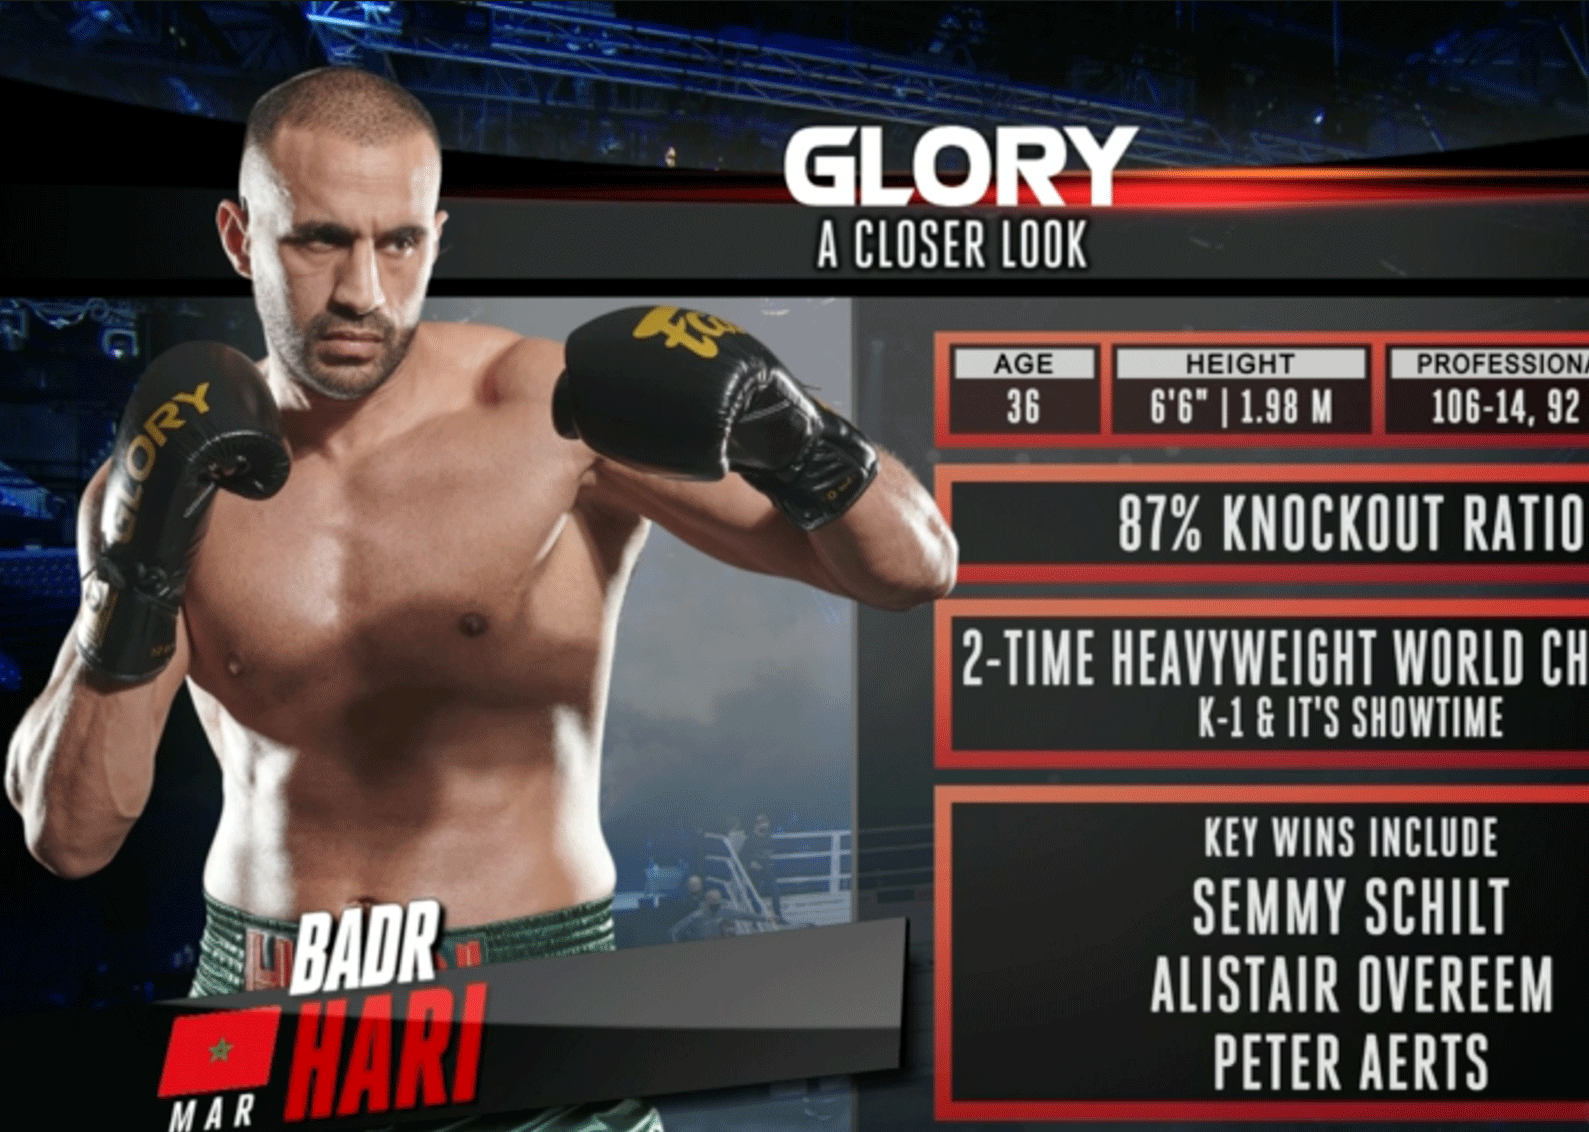 GLORY Badr vs Benny event verkoopt record aantal online Pay Per View streams